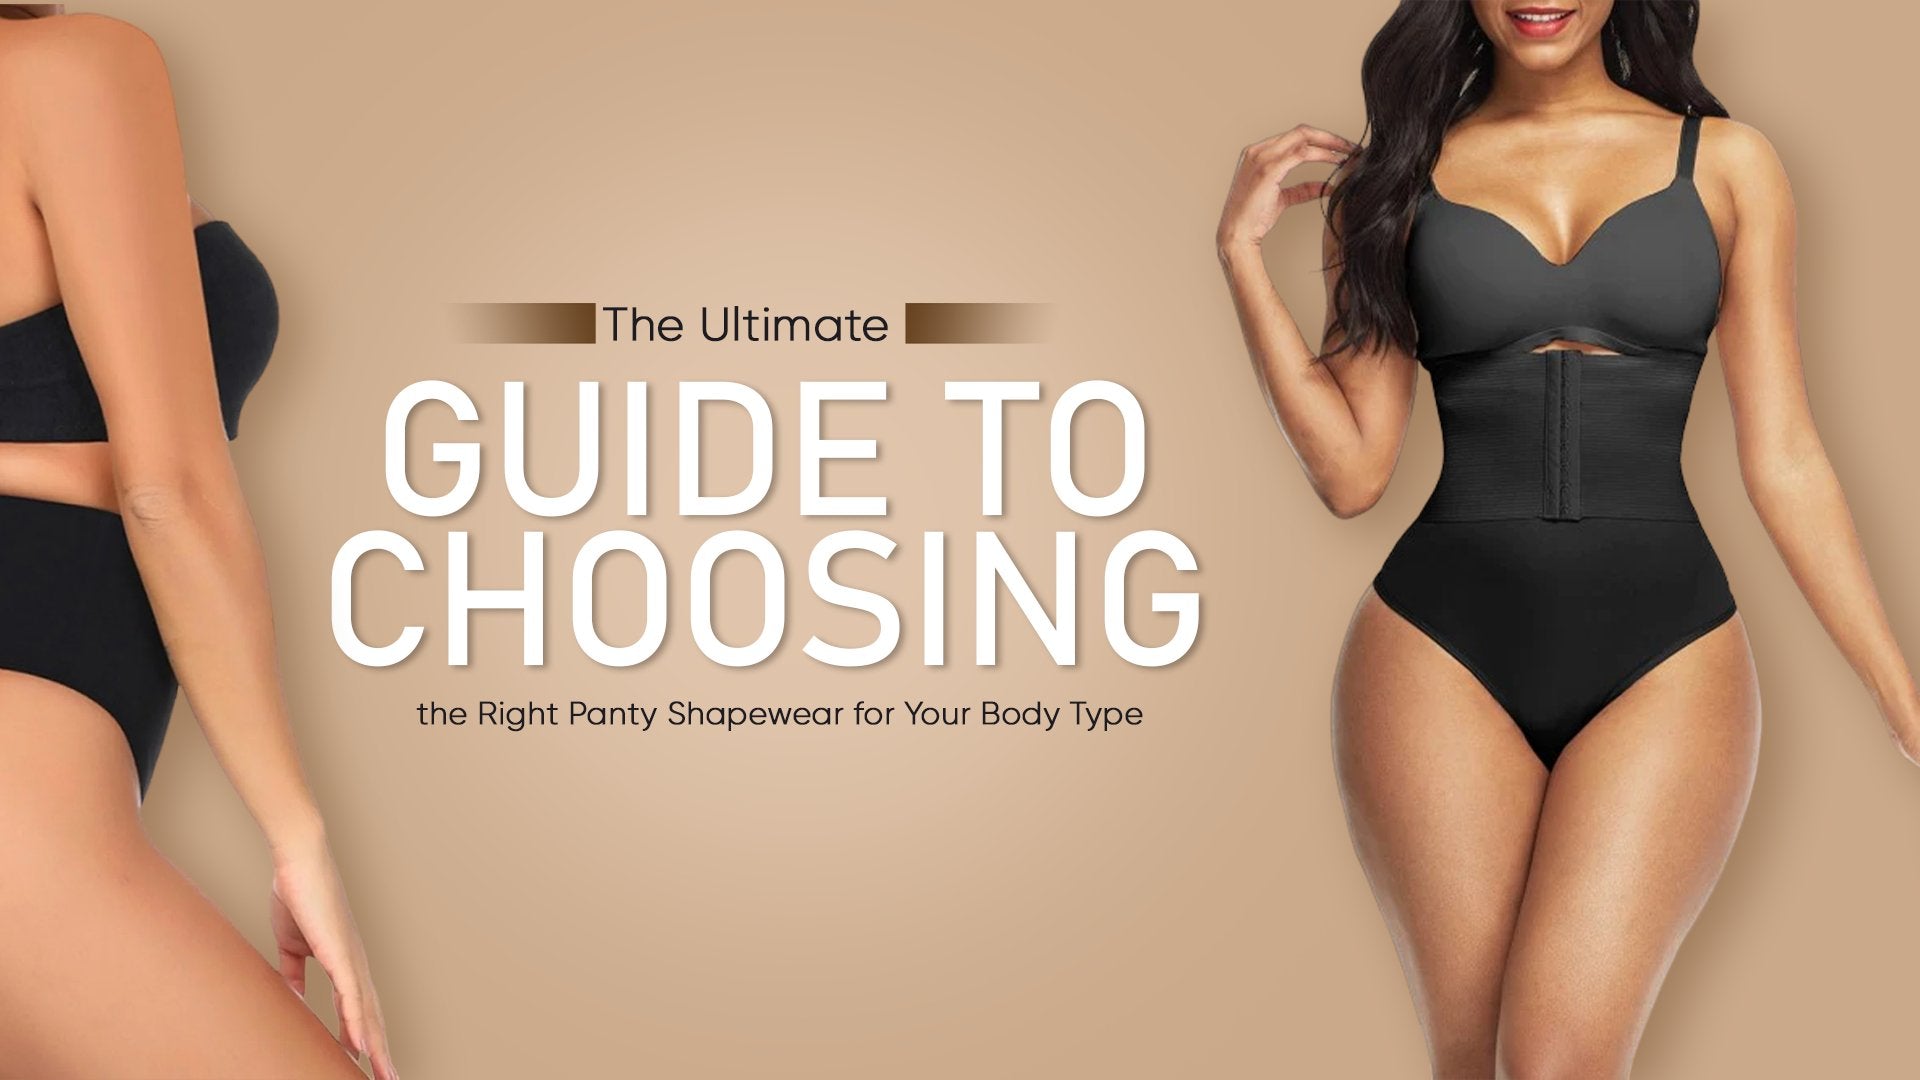 The Ultimate Guide to Choosing the Right Panty Shapewear for your Body Type - WrapAndTuck 